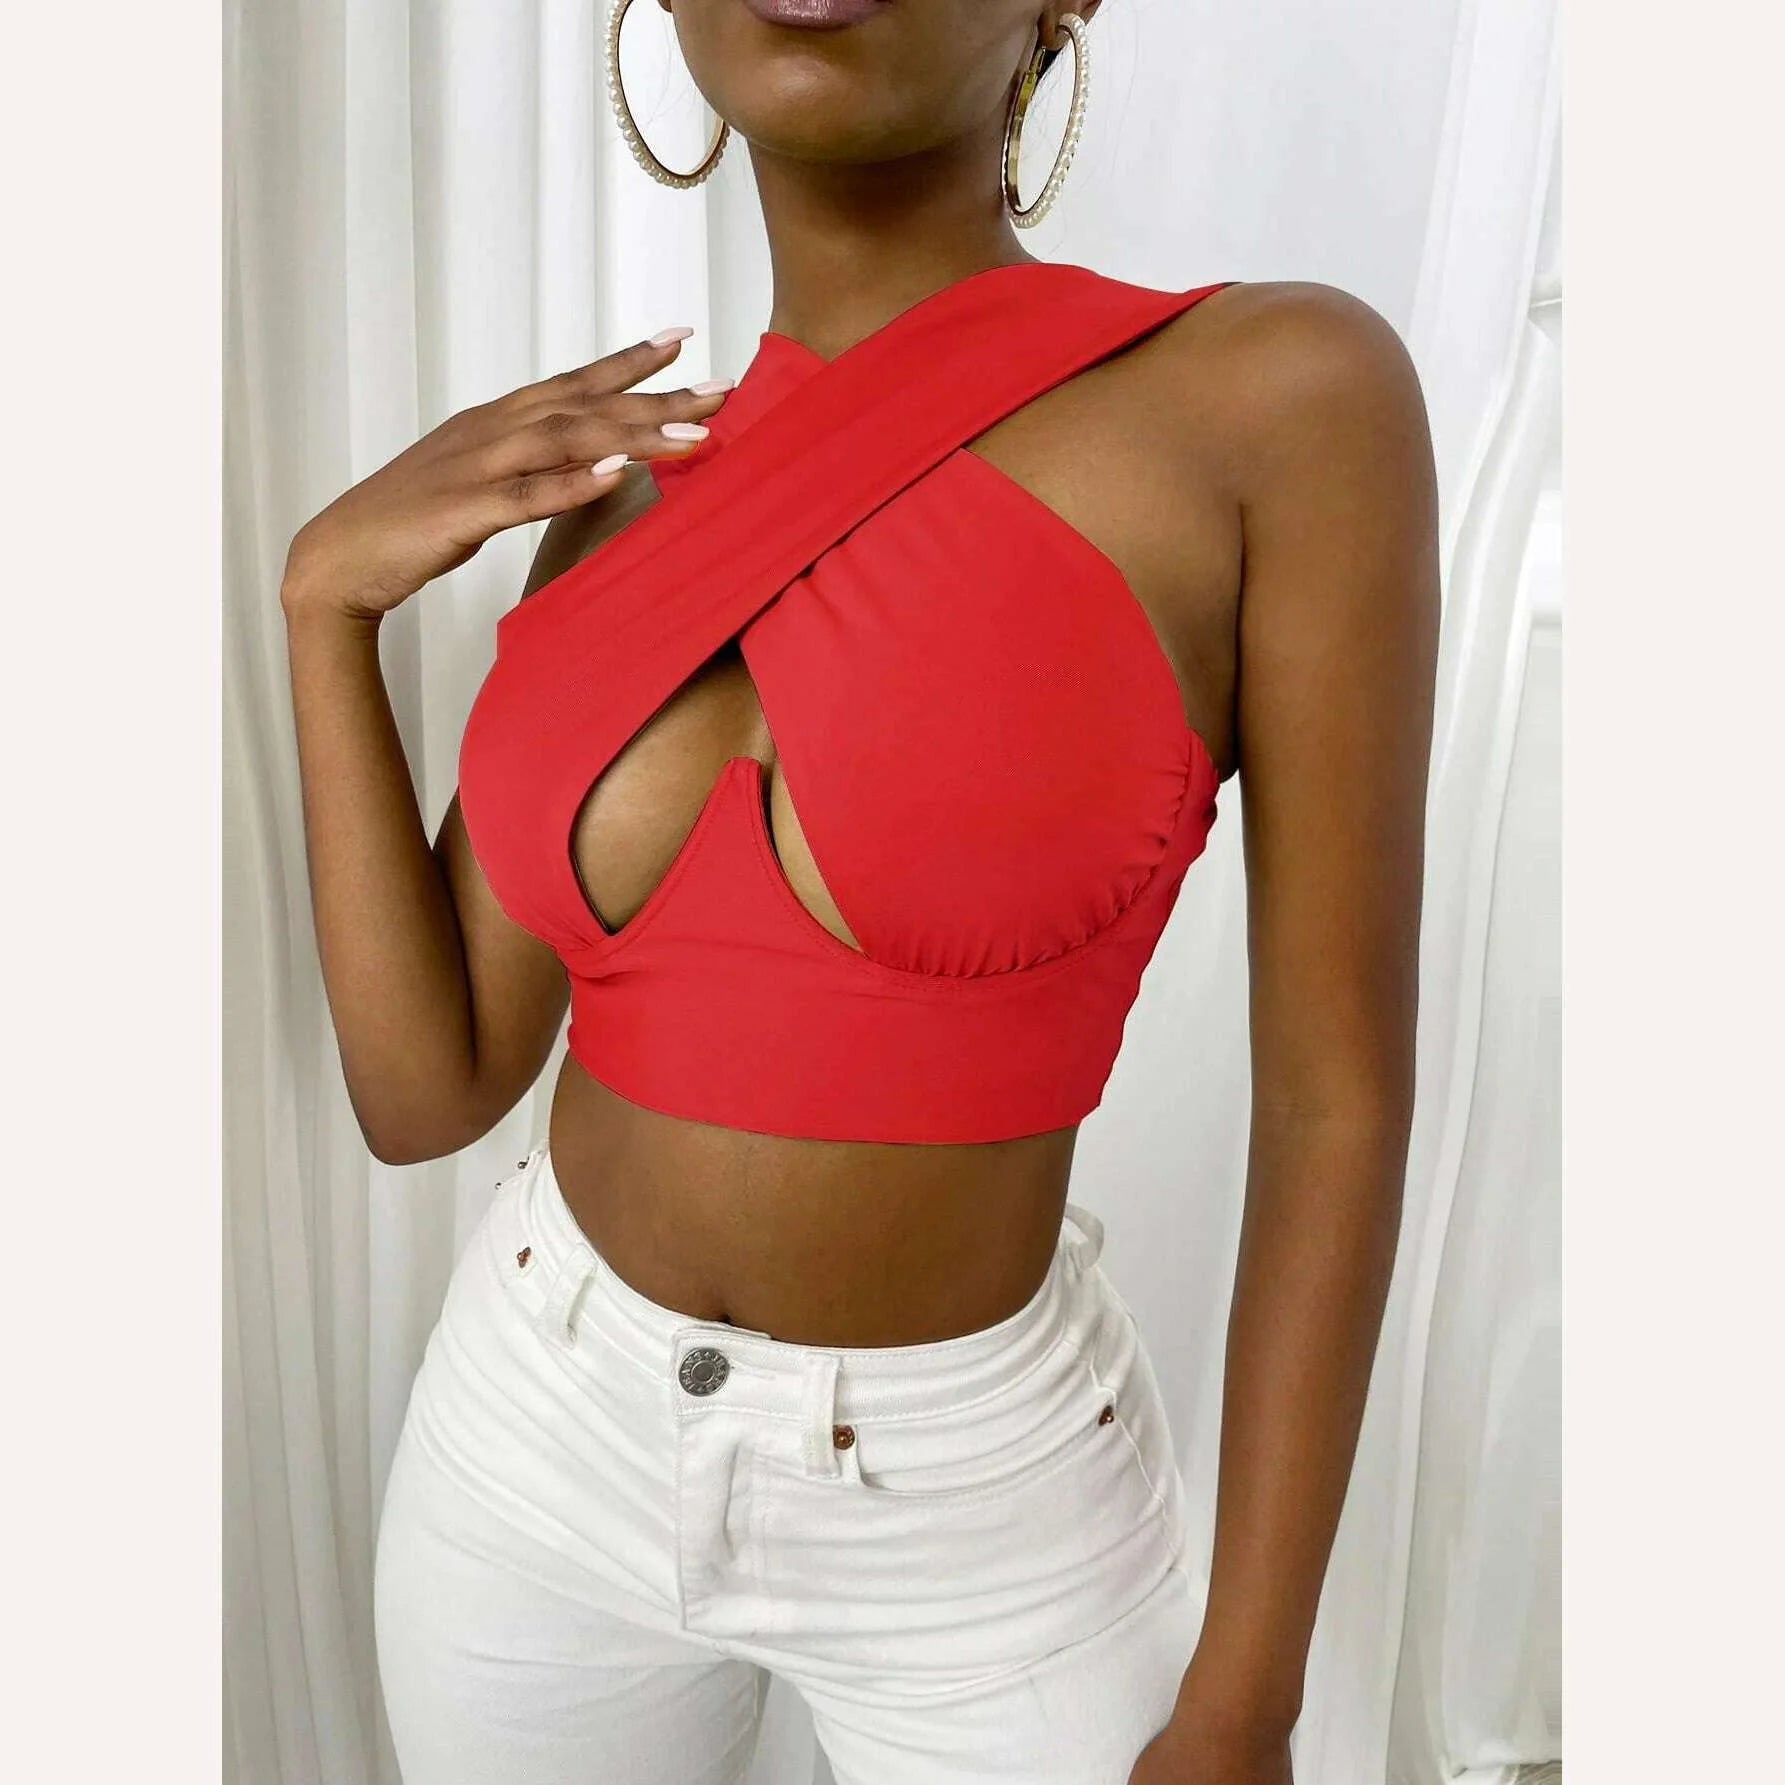 Women’s Criss Cross Tank Tops Sexy Sleeveless Solid Color Cutout Front Crop Tops Party Club Streetwear Summer Lady Bustier Tops